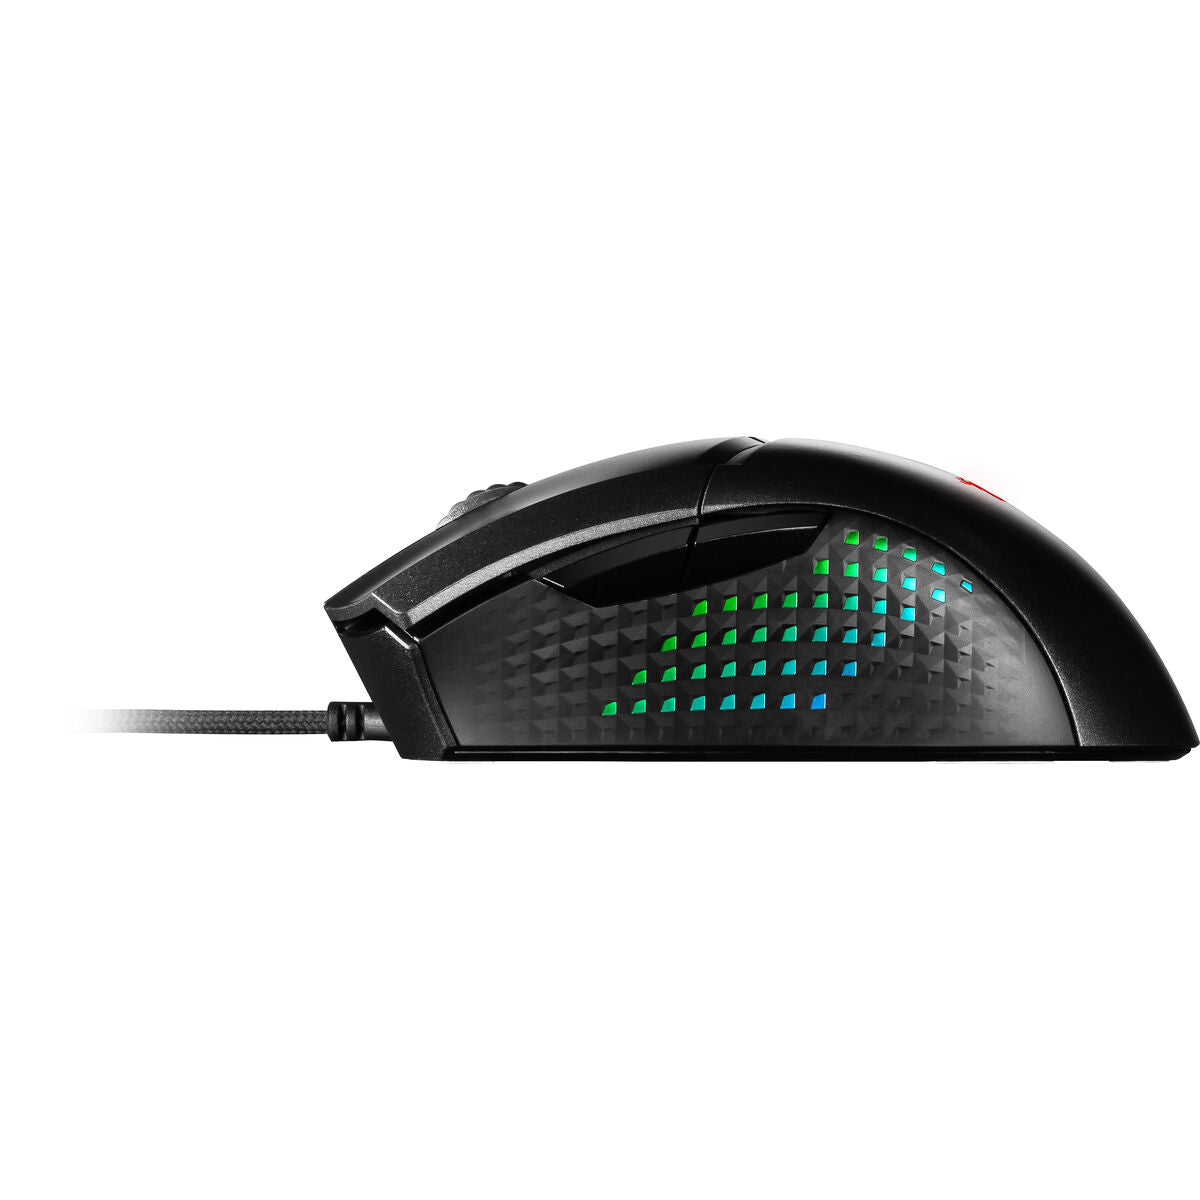 Wireless Mouse MSI CLUTCH GM51 LIGHTWEIGHT, MSI, Computing, Accessories, wireless-mouse-msi-clutch-gm51-lightweight, Brand_MSI, category-reference-2609, category-reference-2642, category-reference-2656, category-reference-t-19685, category-reference-t-19908, category-reference-t-21353, computers / peripherals, Condition_NEW, office, Price_100 - 200, Teleworking, RiotNook